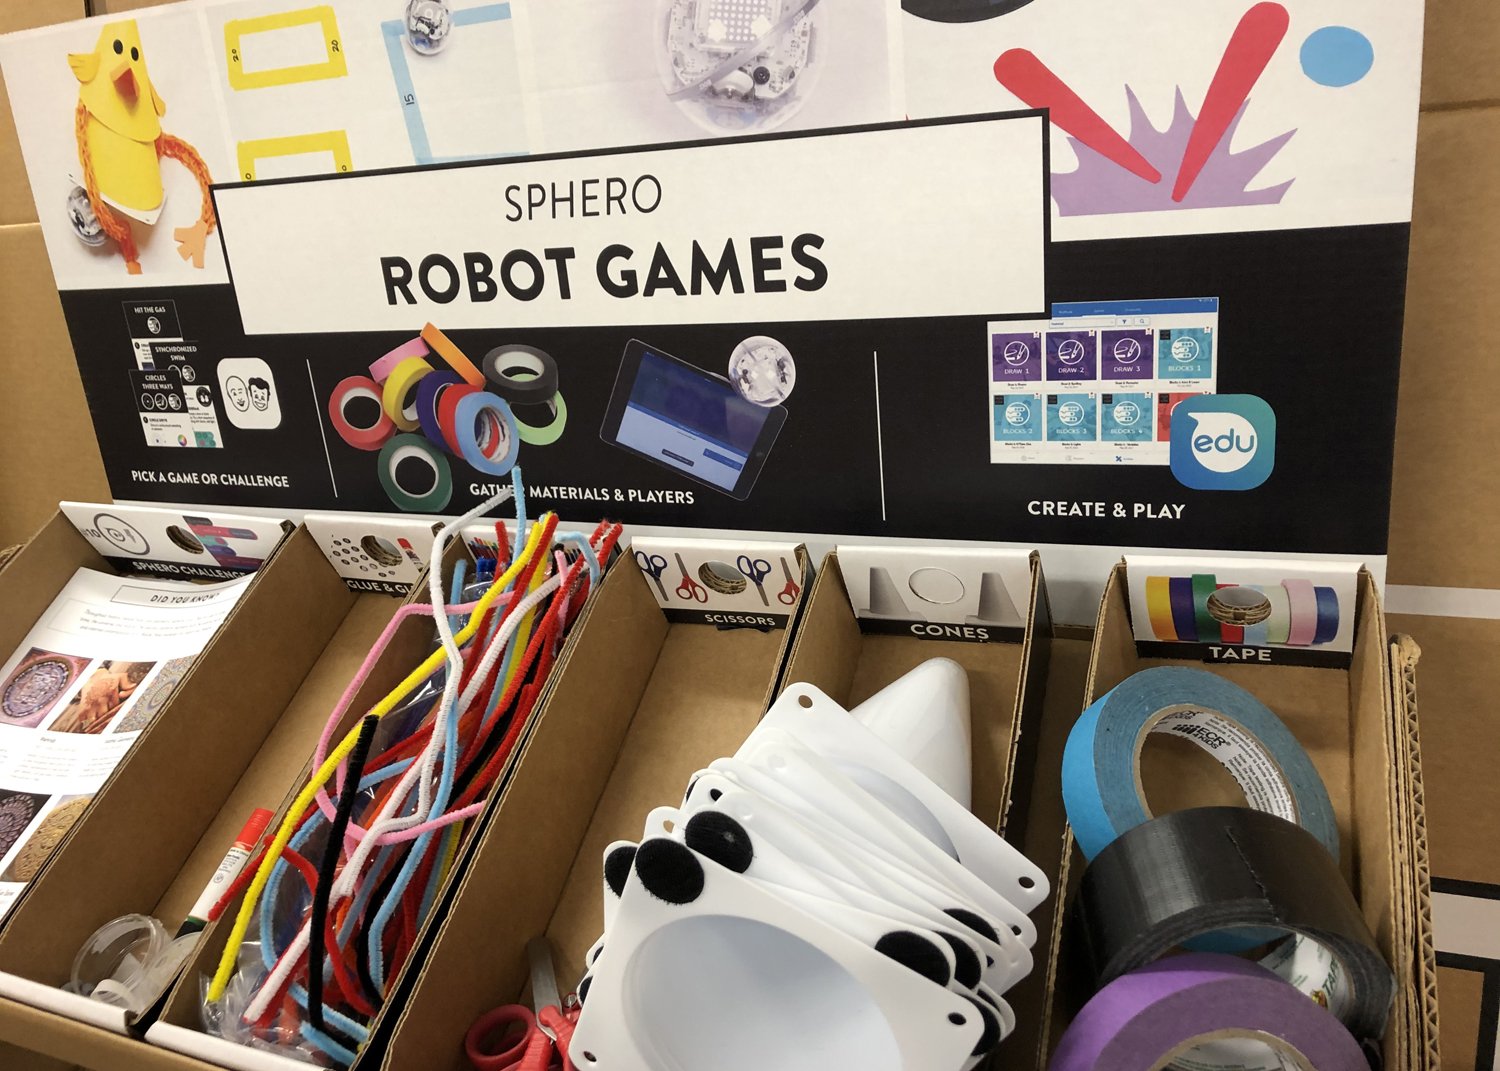   Additional Robotics challenges and games supplies  